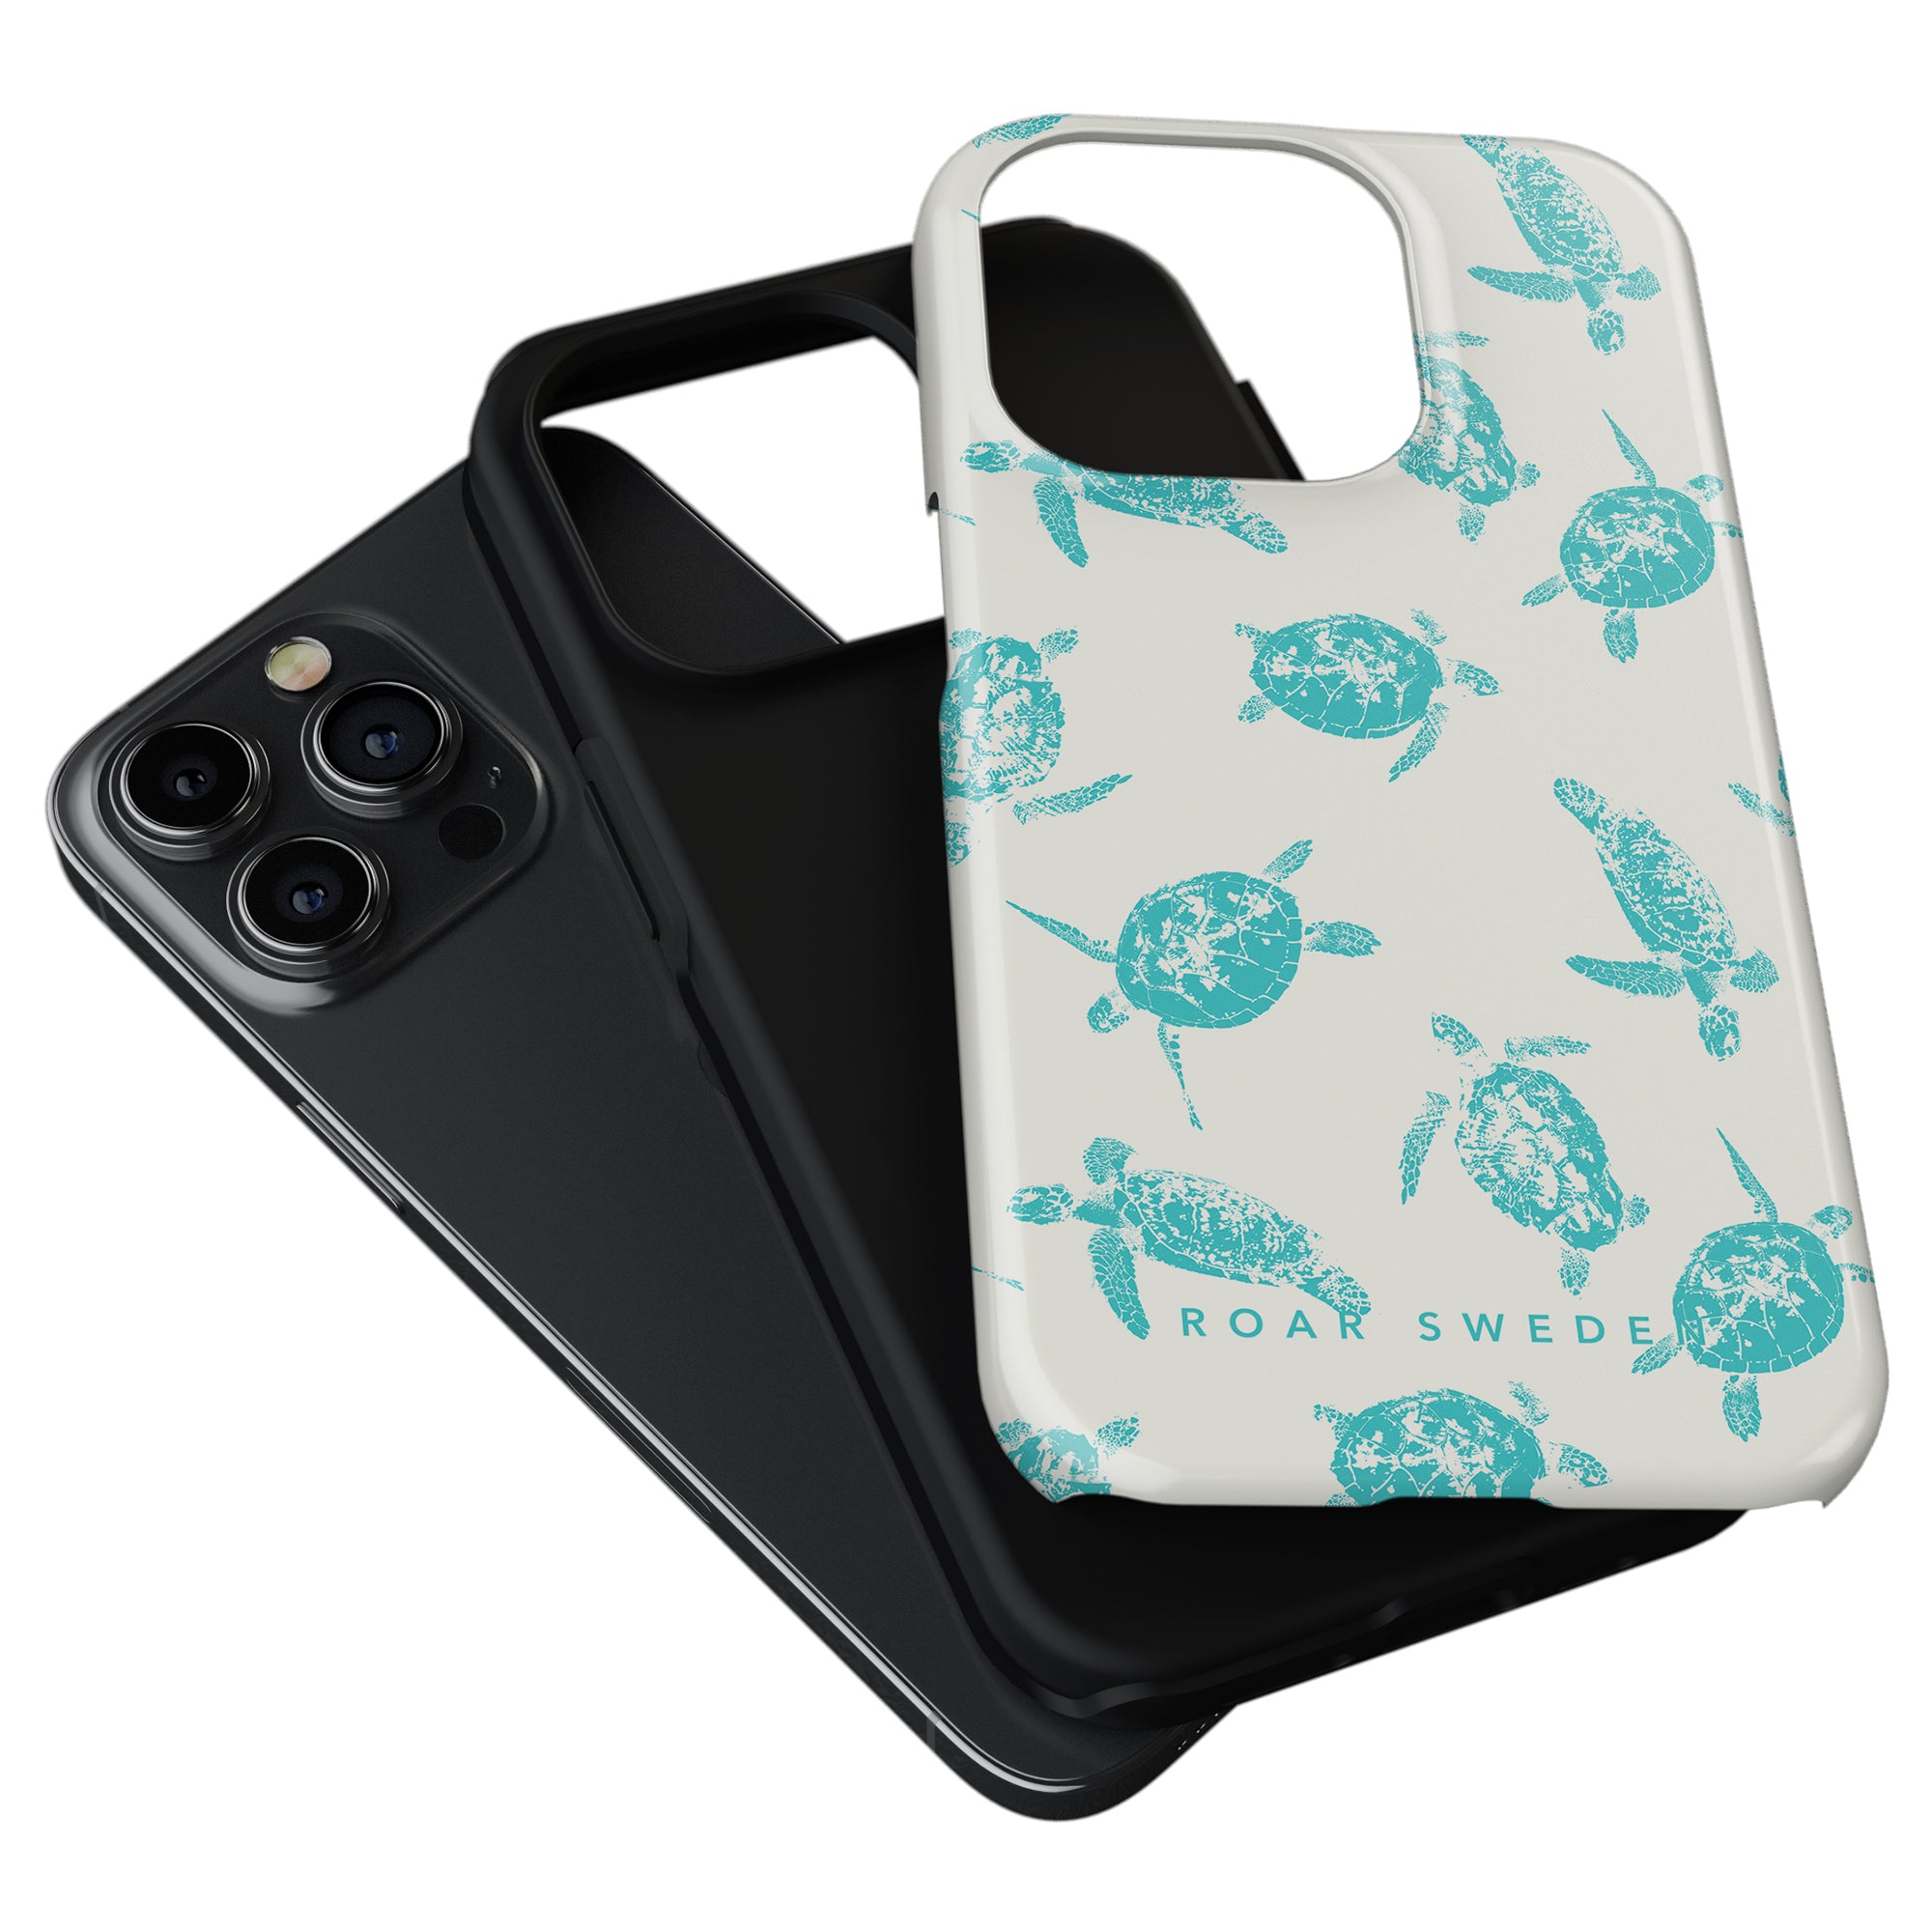 Black smartphone with a Sea Turtles - Tough Case from the ocean collection.